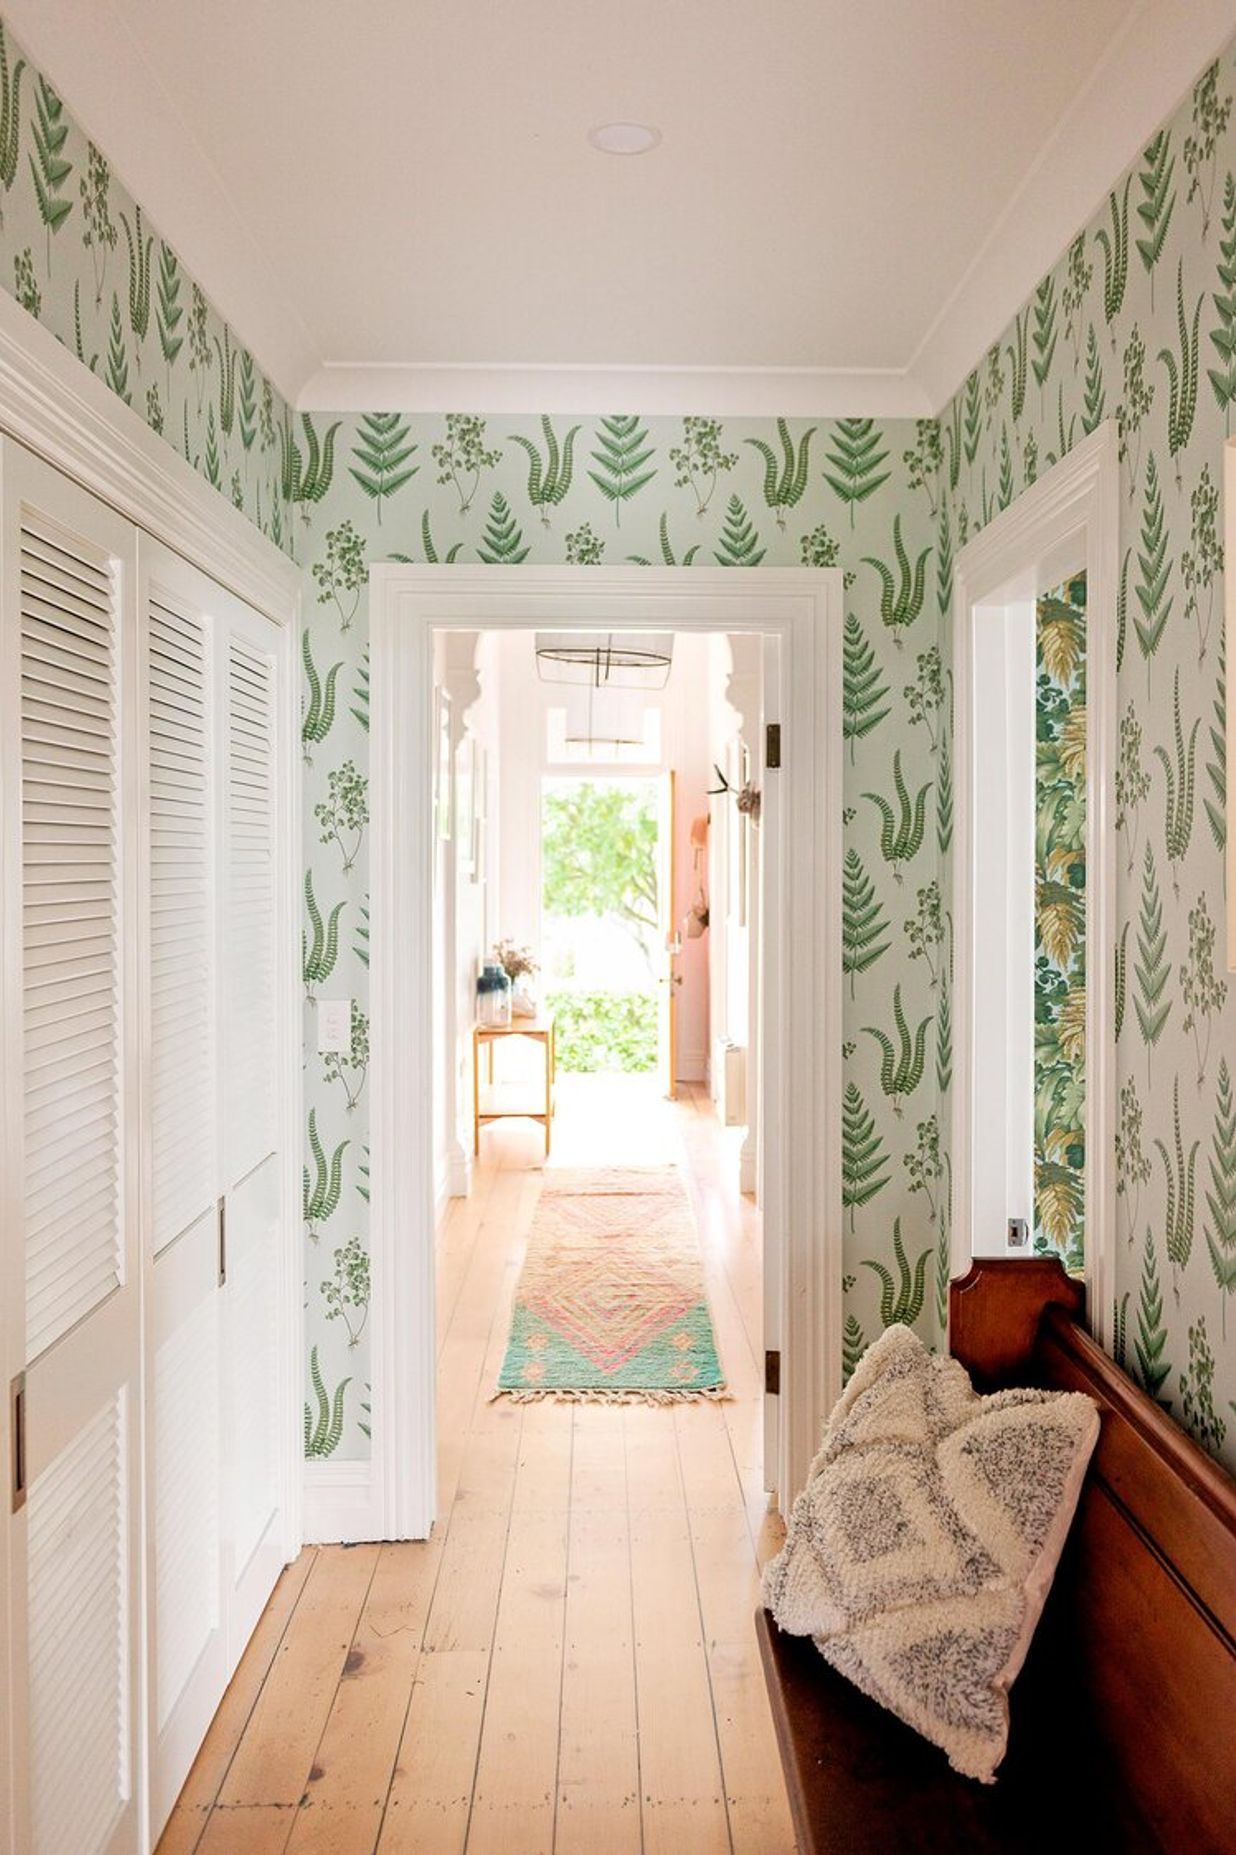 A Bohzali hallway runner adds to the colourful character of this home styled by Hello Saturday.